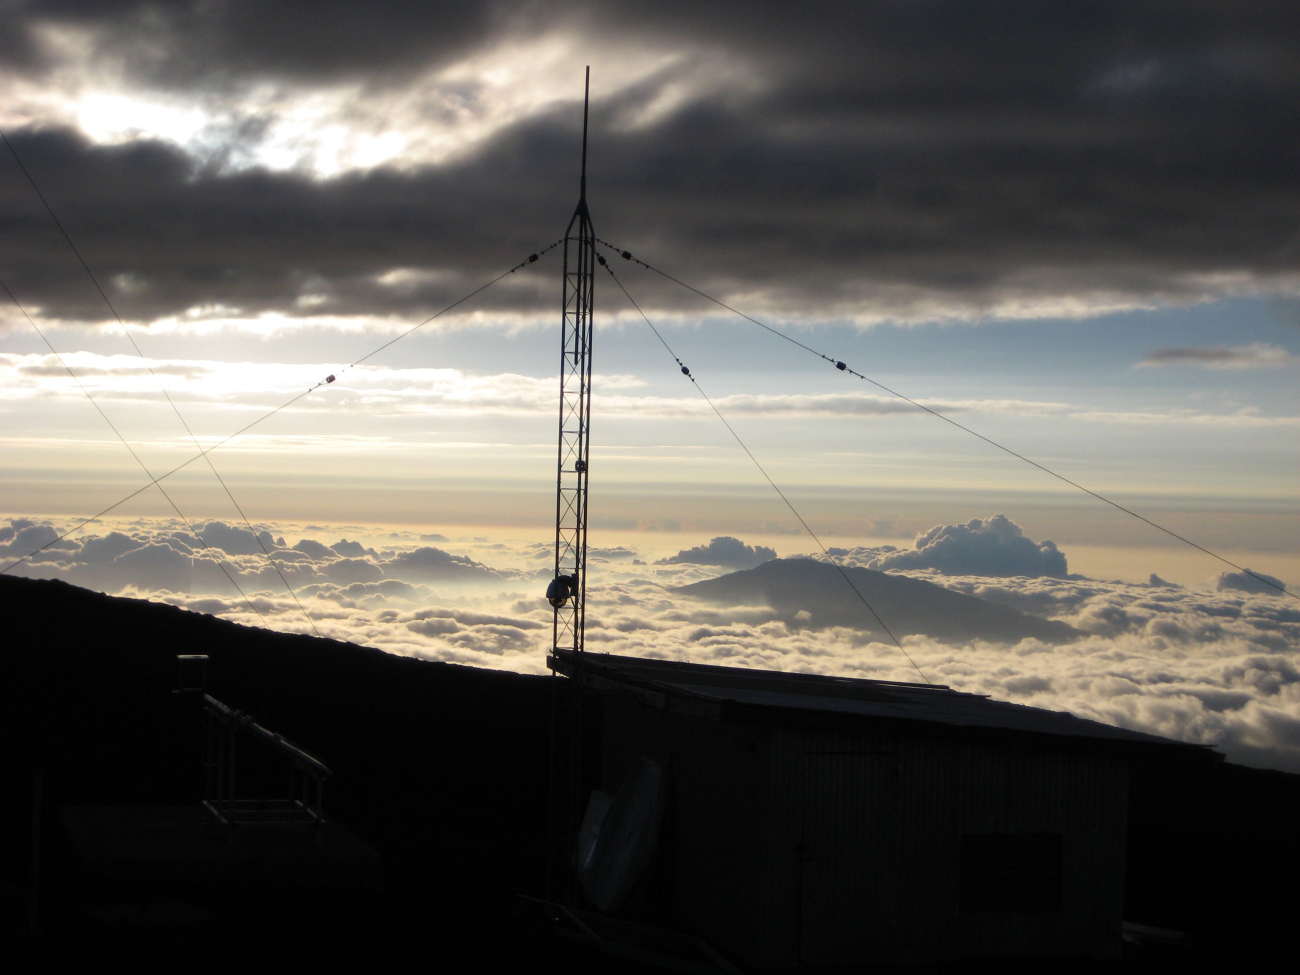 Looking NW from the Mauna Loa atmospheric observatory in the lateafternoon